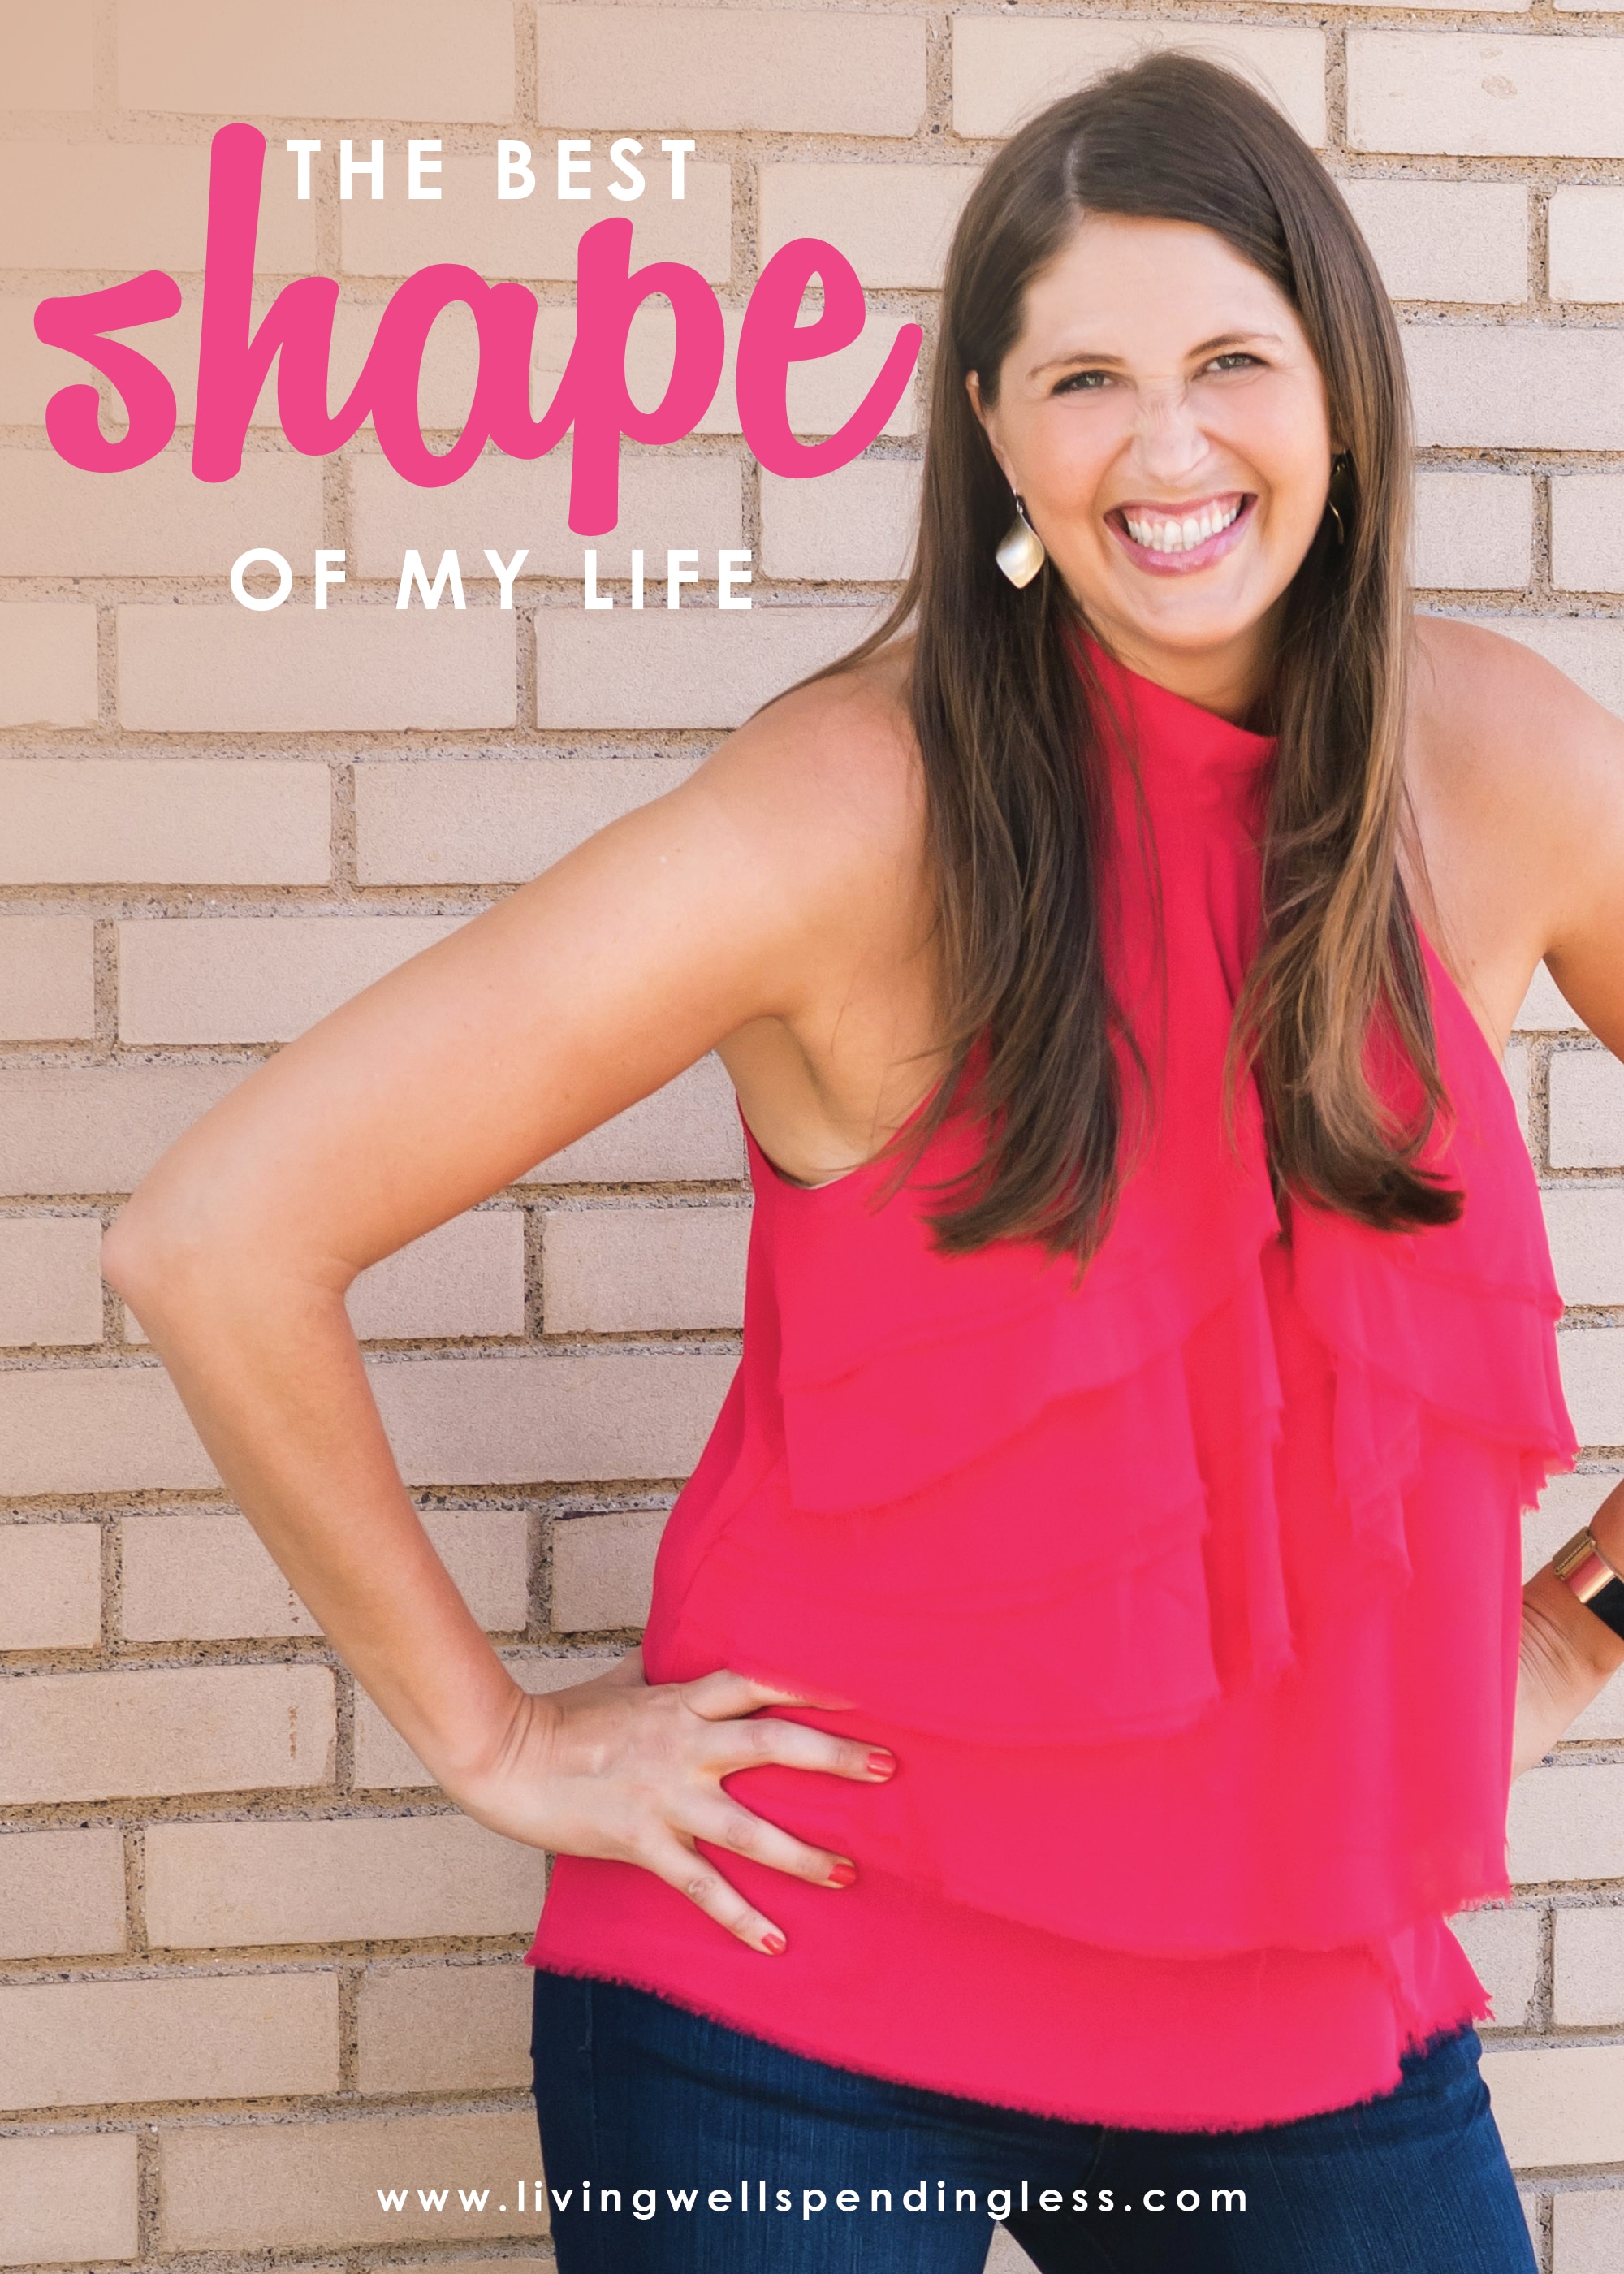 Losing weight is HARD. But when we feel good about how we look on the outside, we feel good on the inside, too. We stop wanting to hide and start daring to put ourselves out there, which gives us confidence to do even more. In this episode of the Do It Scared Podcast, Ruth shares 4 key steps to take to improve your body image and increase your confidence!